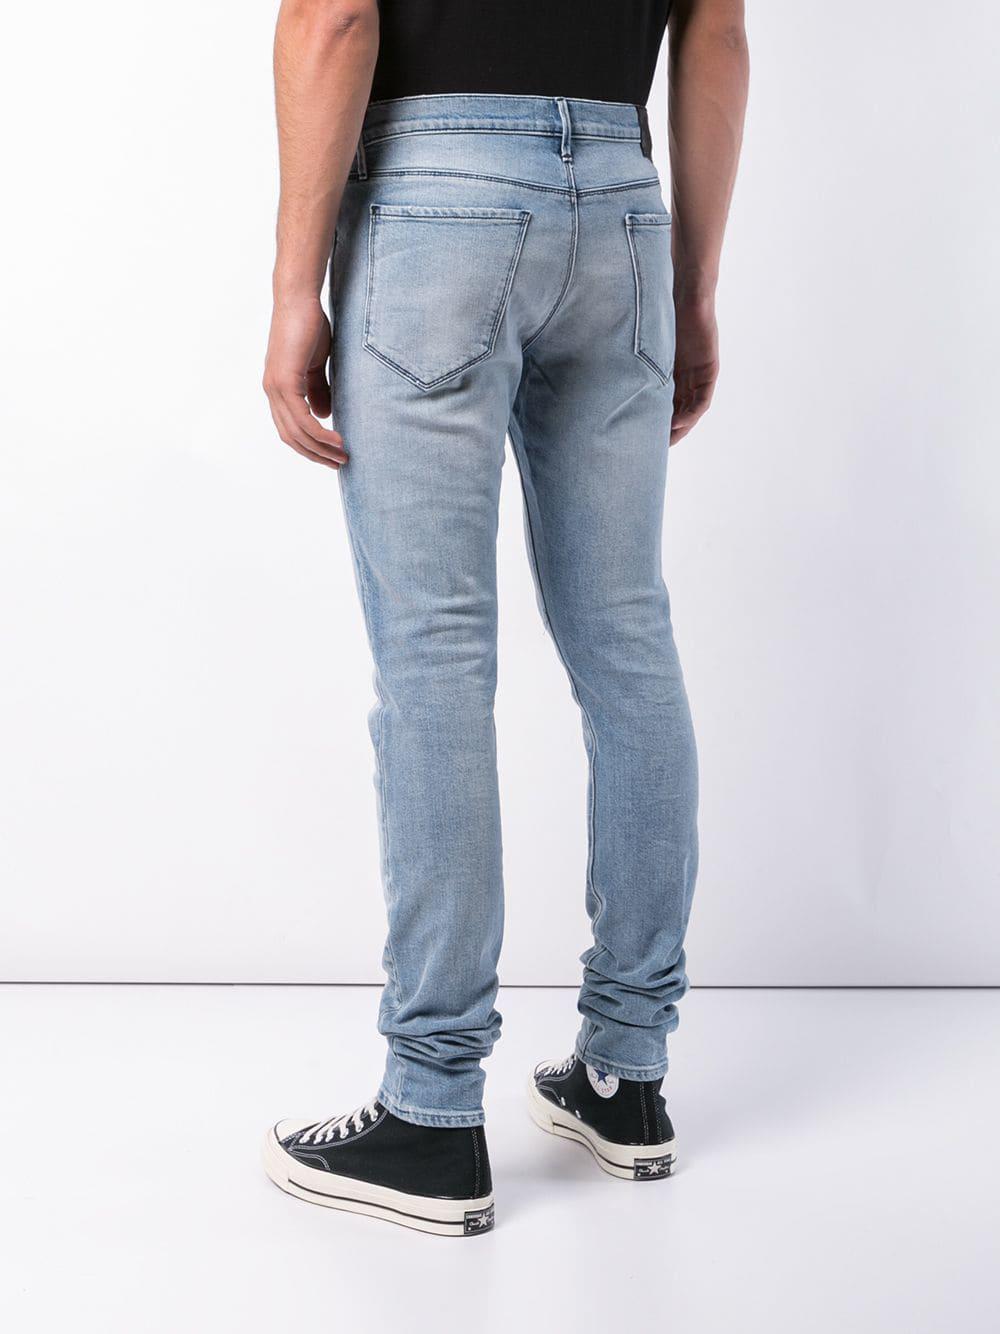 RTA Synthetic Skinny Jeans in Blue for Men - Lyst